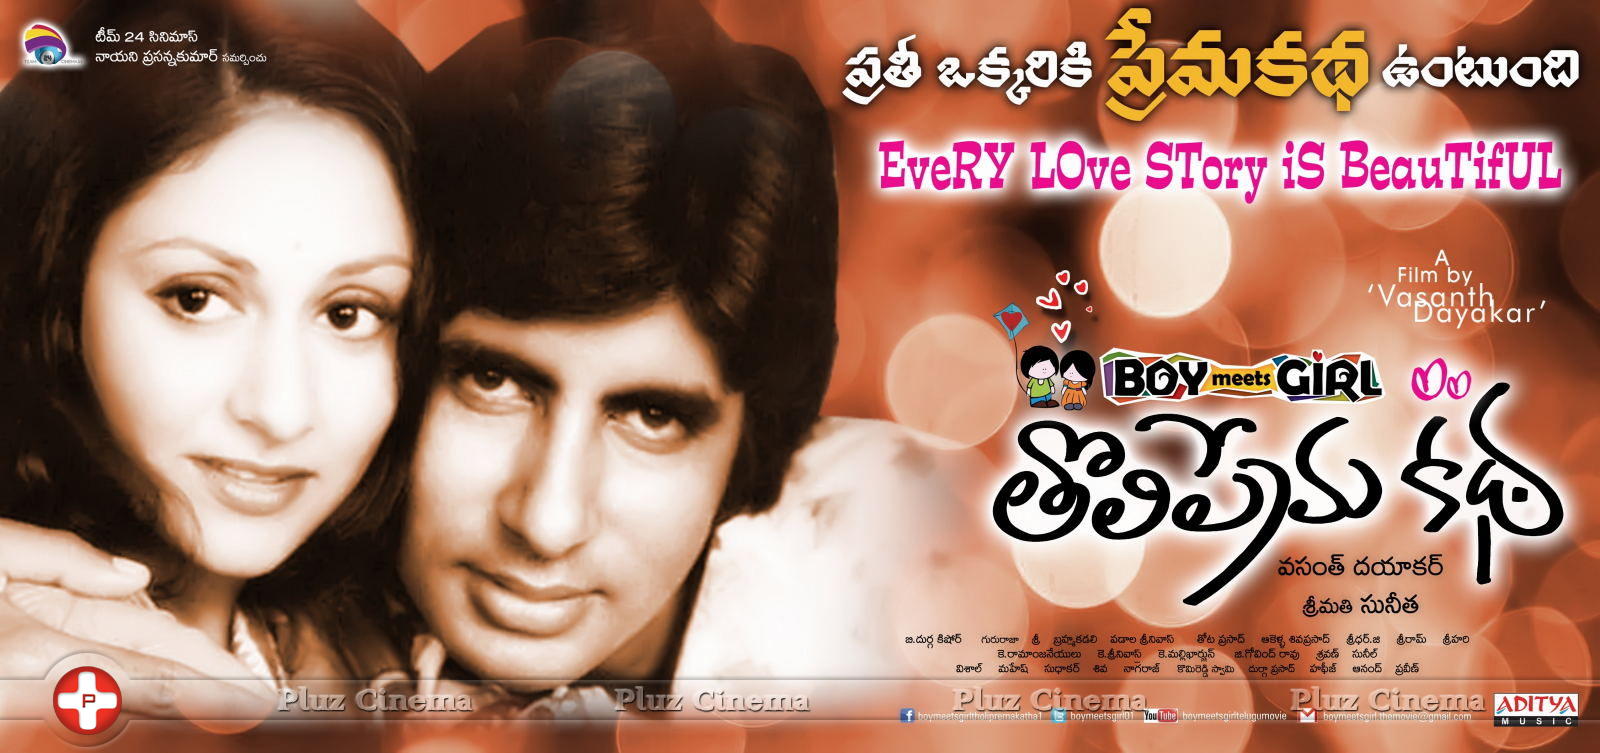 Boy meets Girl Tholiprema Katha Movie New Posters | Picture 735063